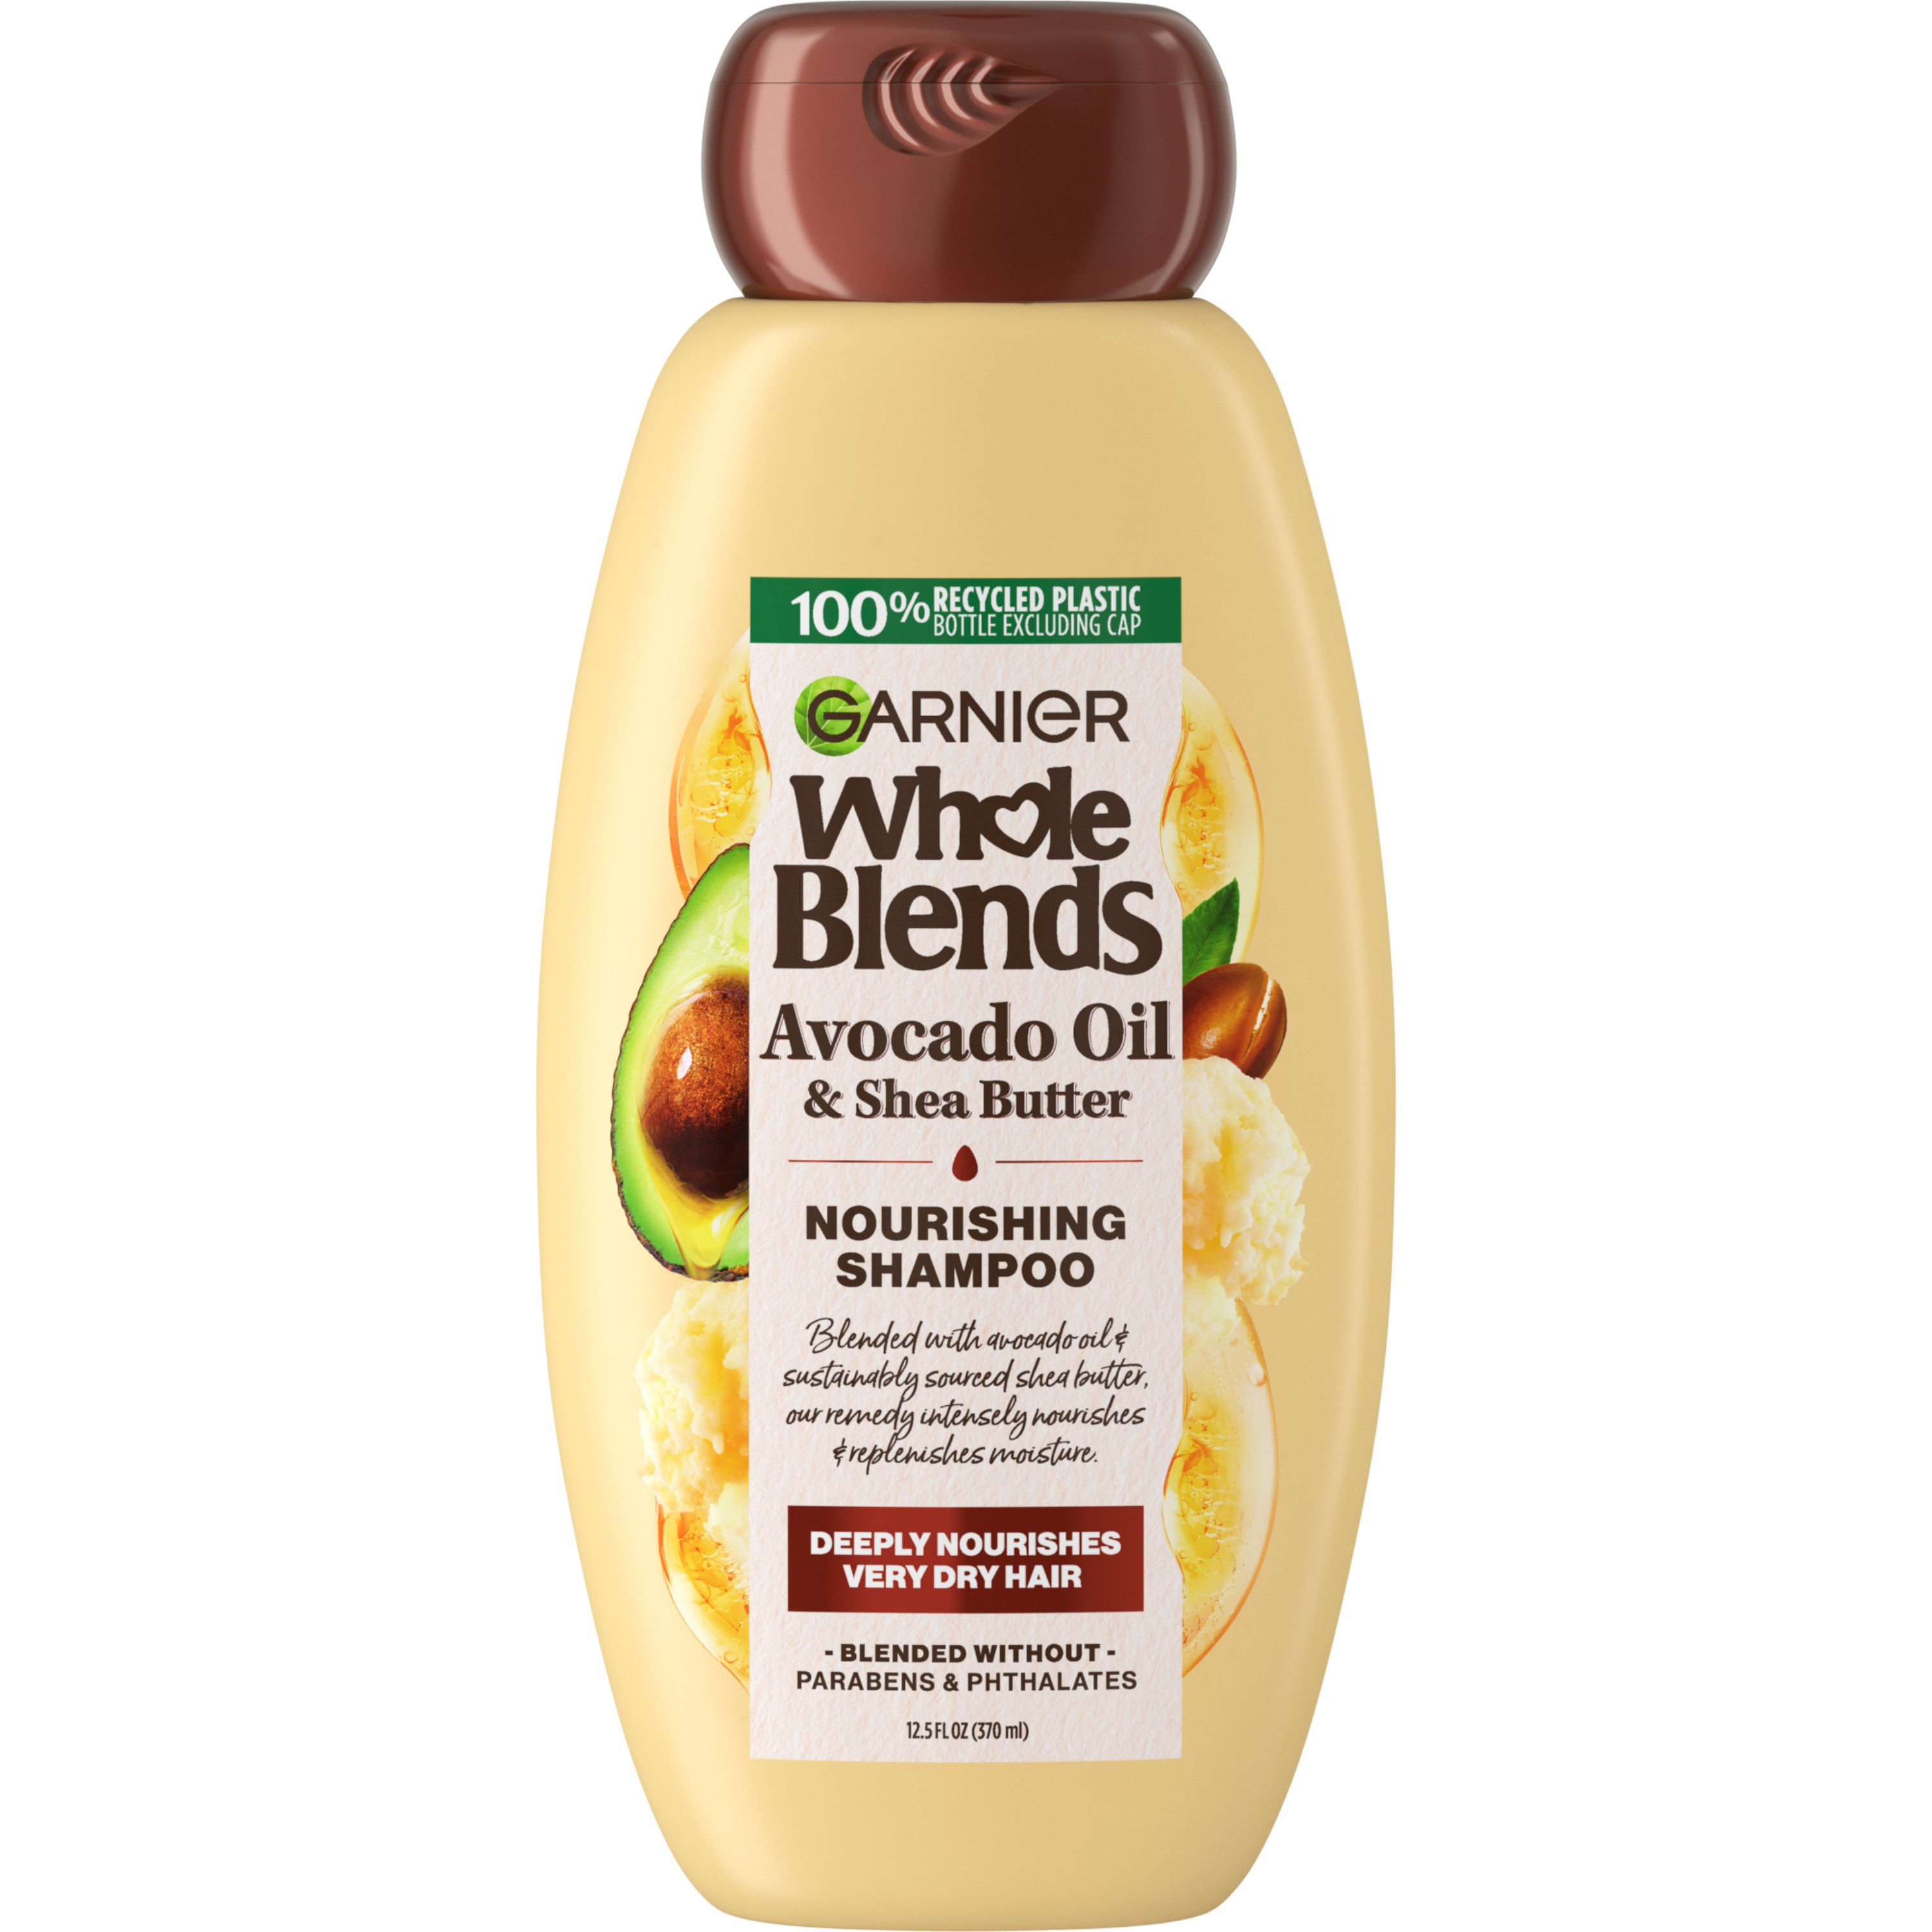 Garnier Whole Blends Nourishing Shampoo with Avocado Oil and Shea Butter, 12.5 fl oz - image 1 of 8